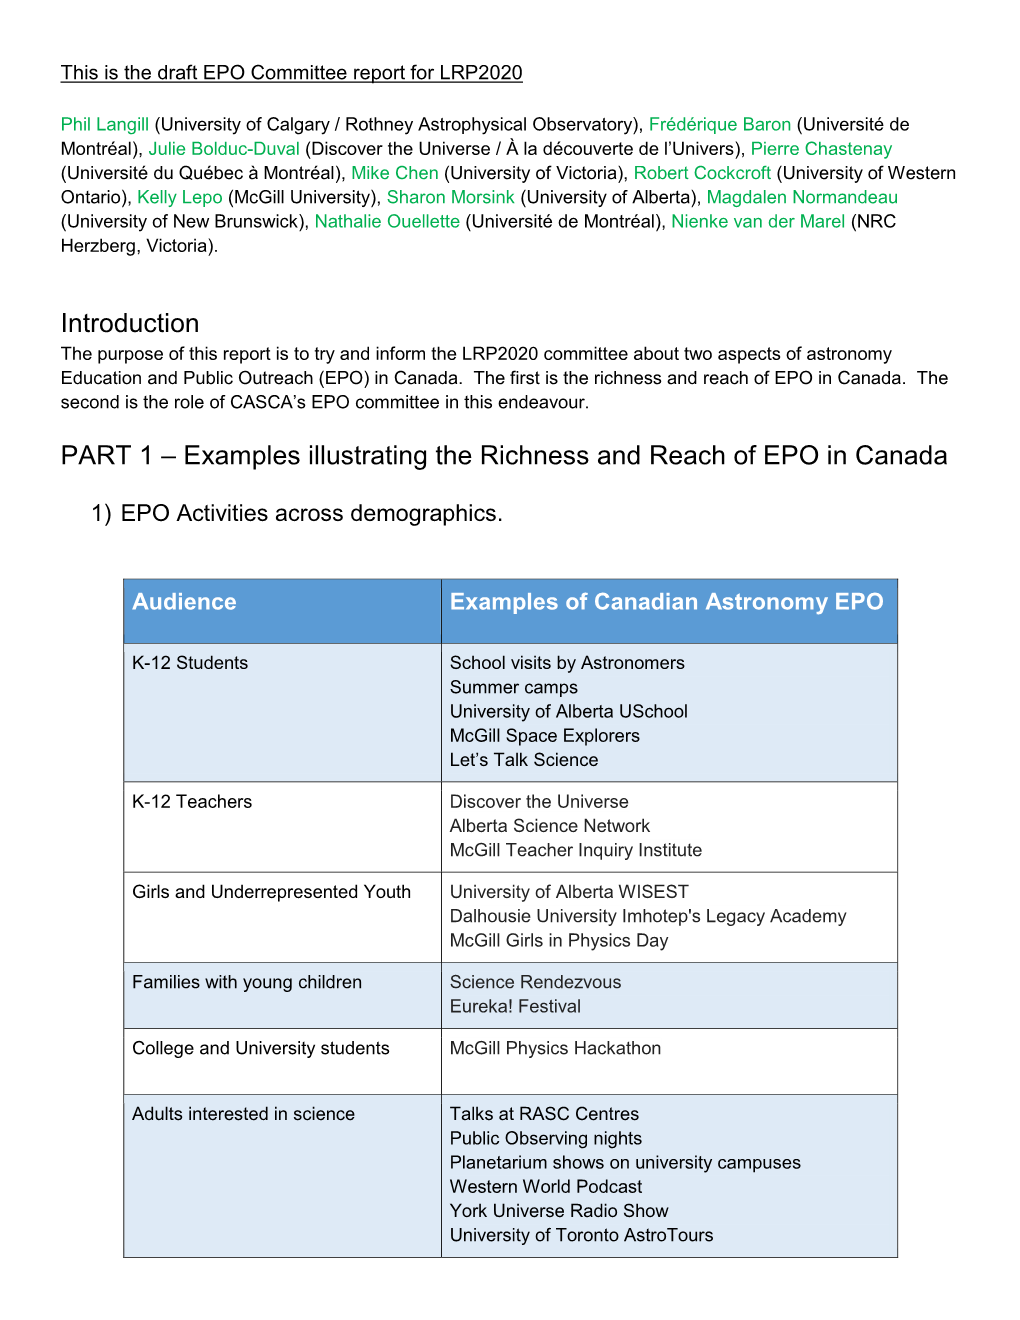 Examples Illustrating the Richness and Reach of EPO in Canada